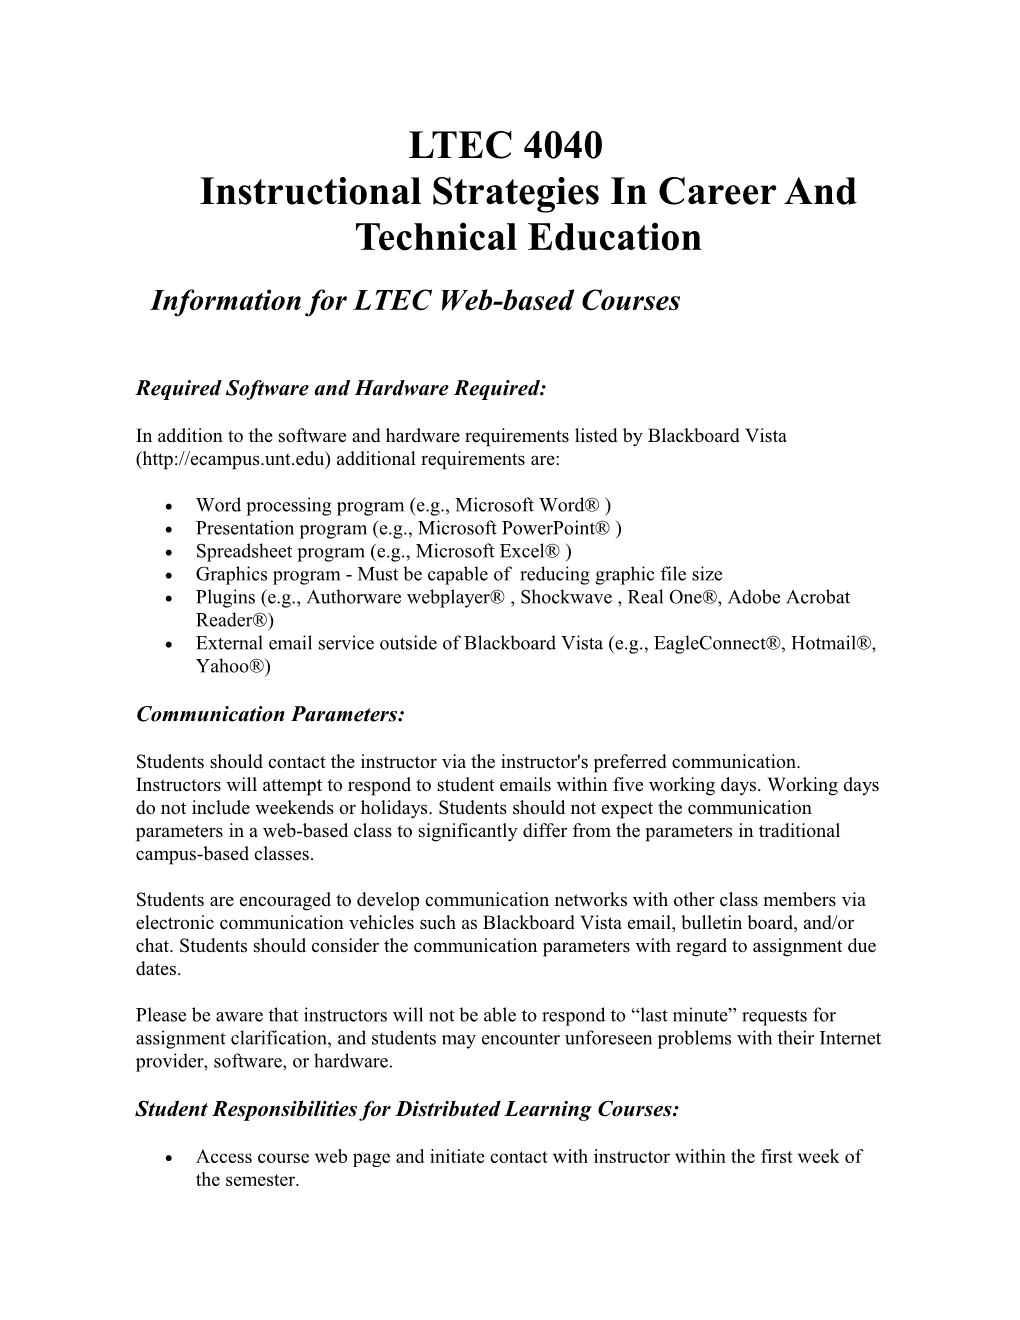 LTEC 4040 Instructional Strategies in Career and Technical Education